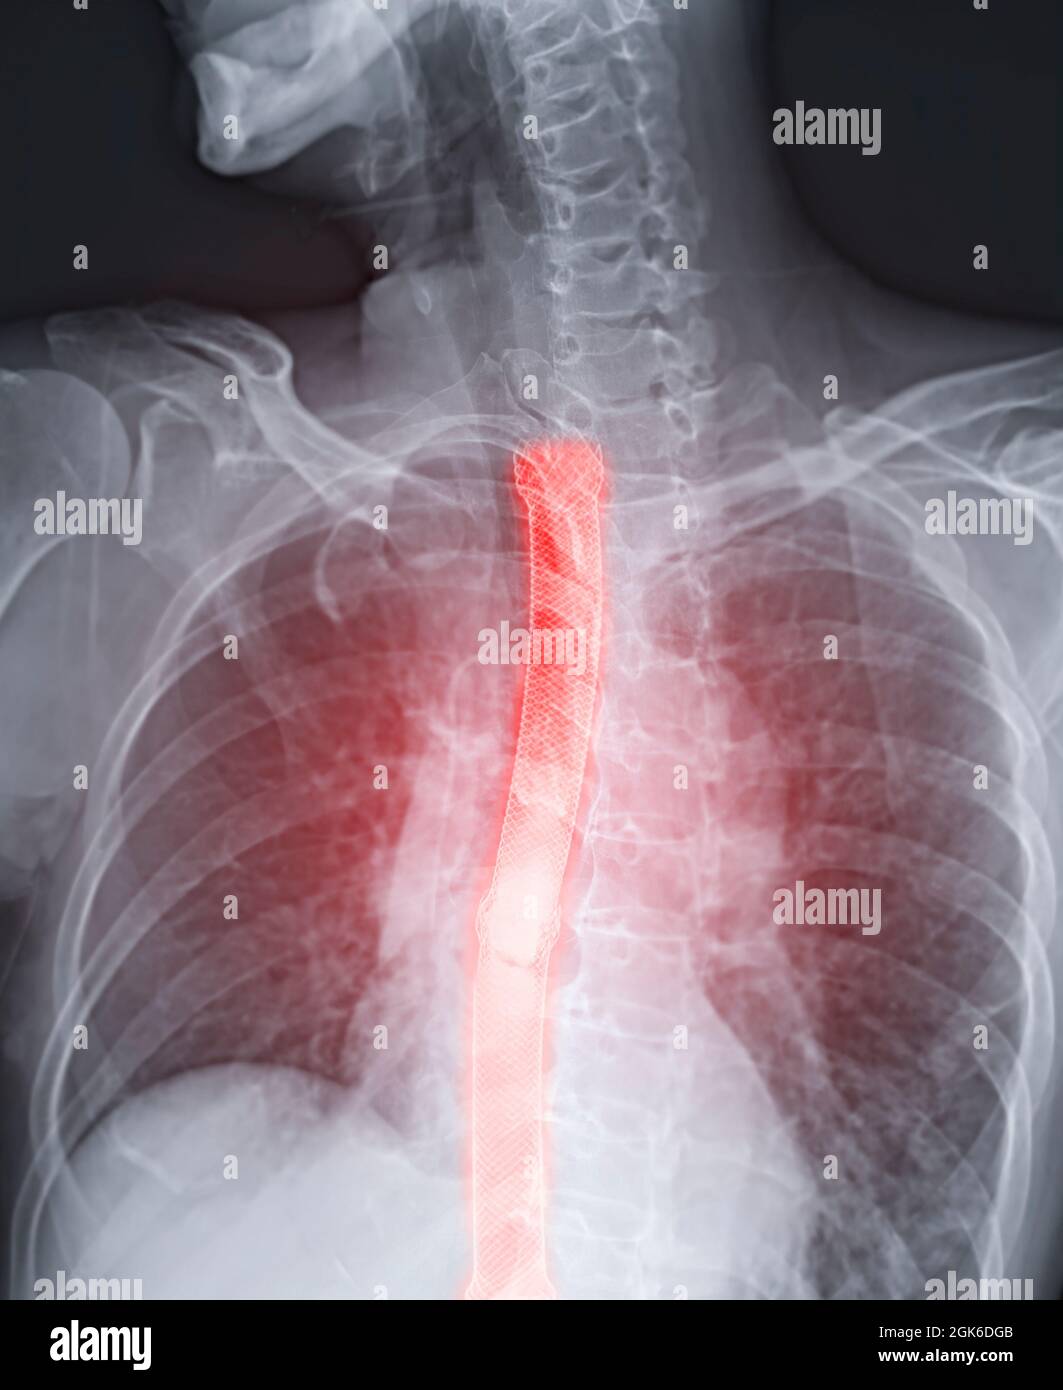 Esophagram or Barium swallow  image   showing Esophageal stent placement for patient  Esophageal cancer. Stock Photo